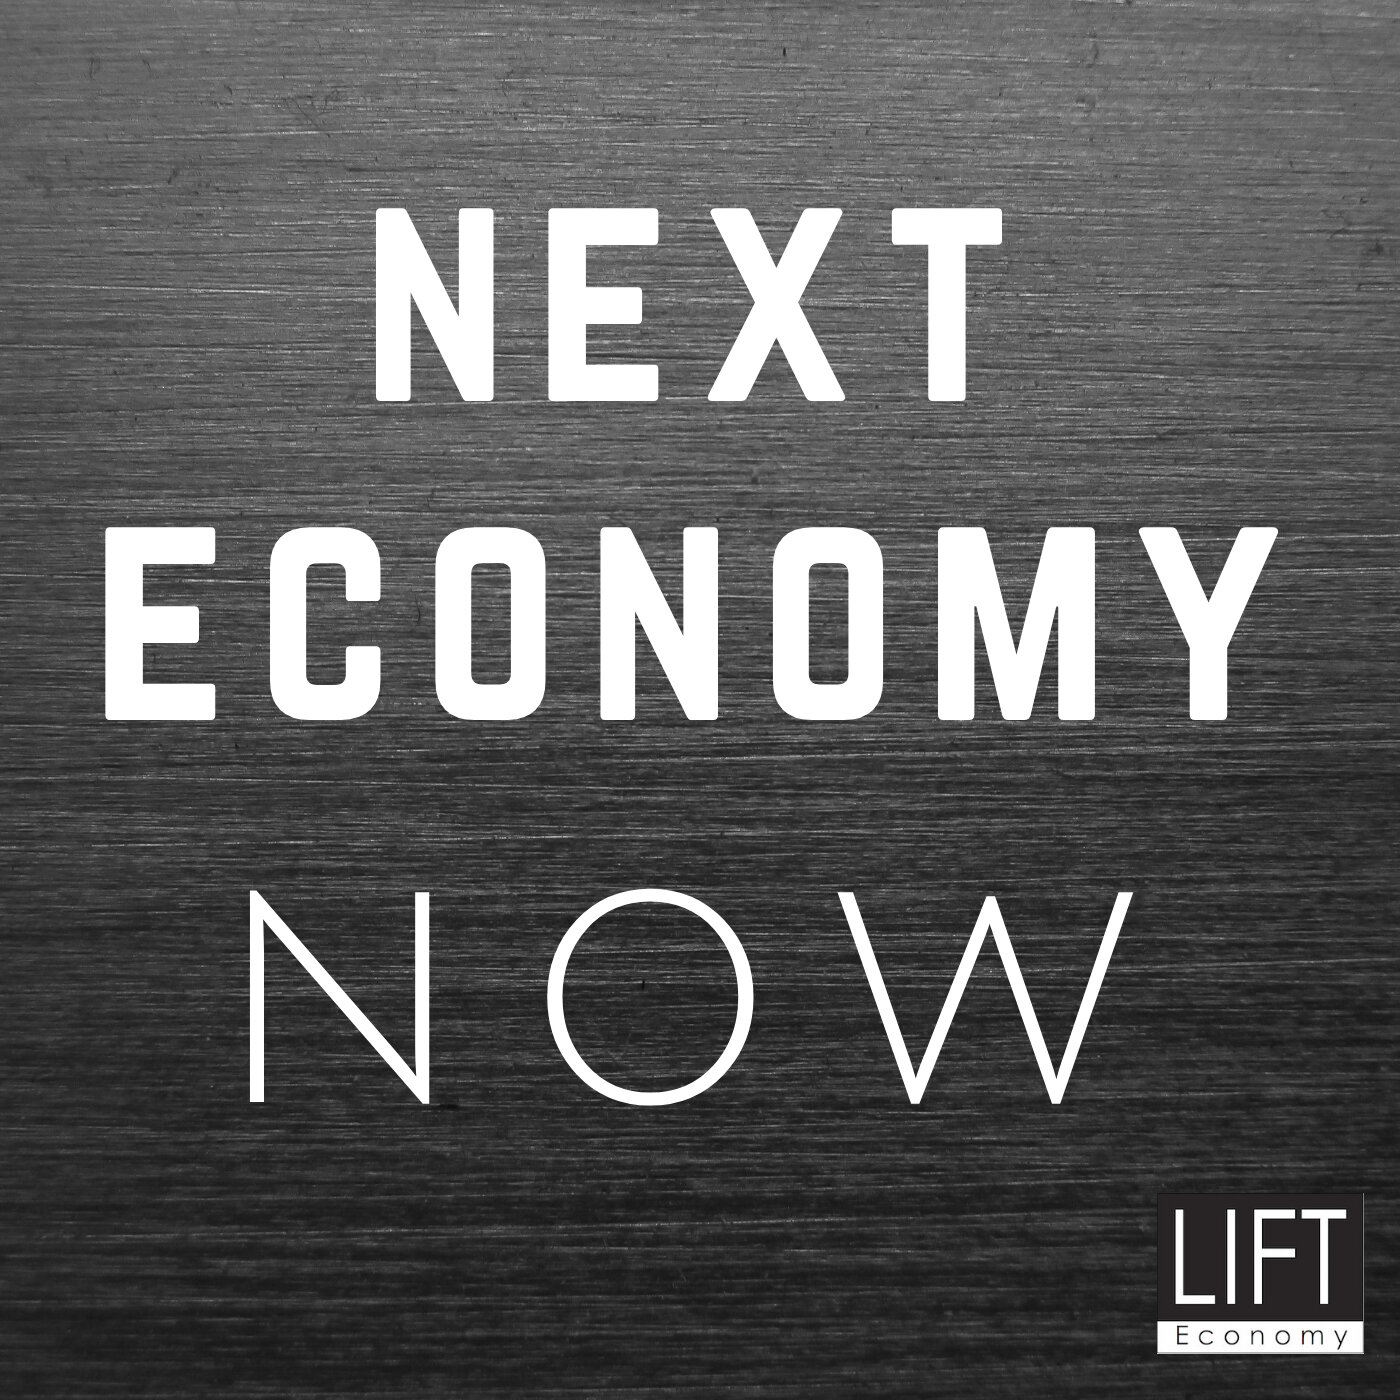 Y now. For Now. Economic is Now on.